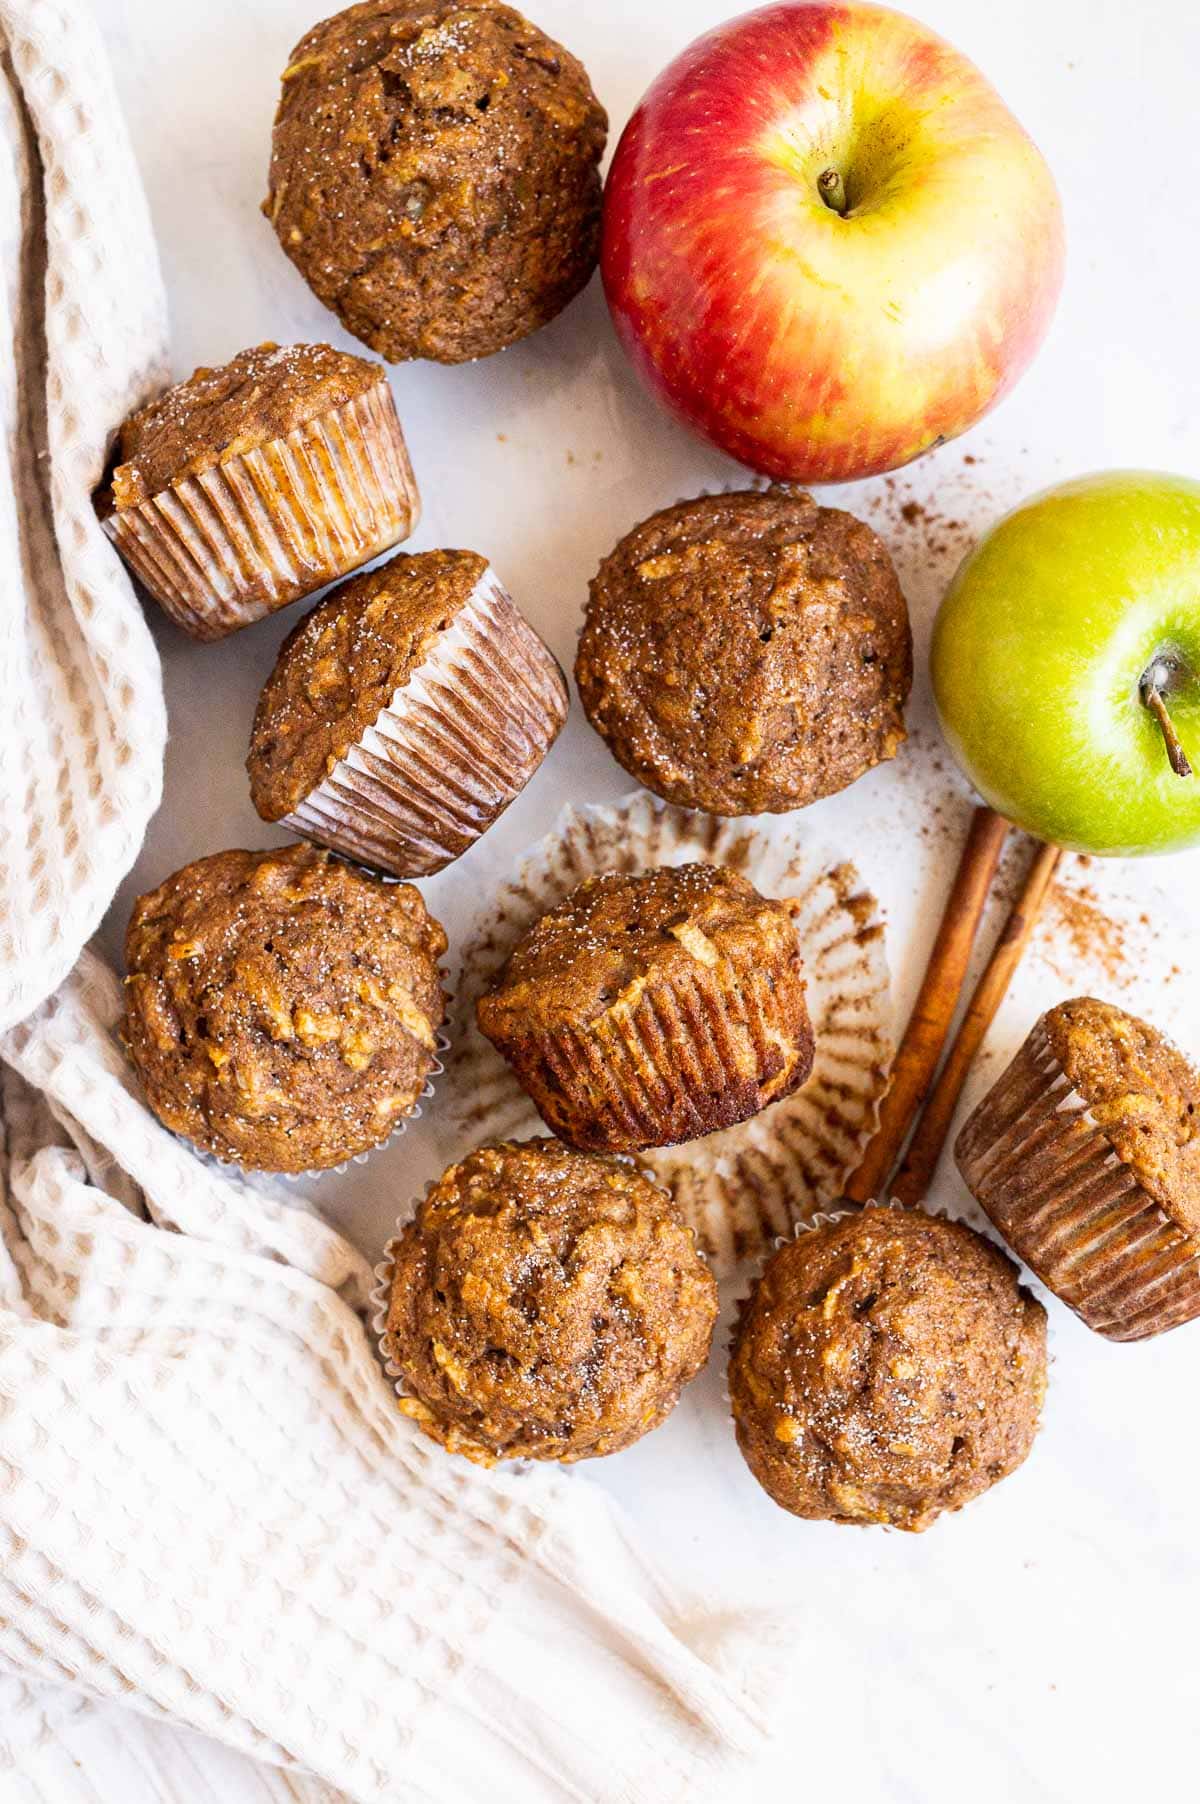 Nine healthy apple muffins sprinkled with sugar. One muffin unwrapped in the center. Decor around.